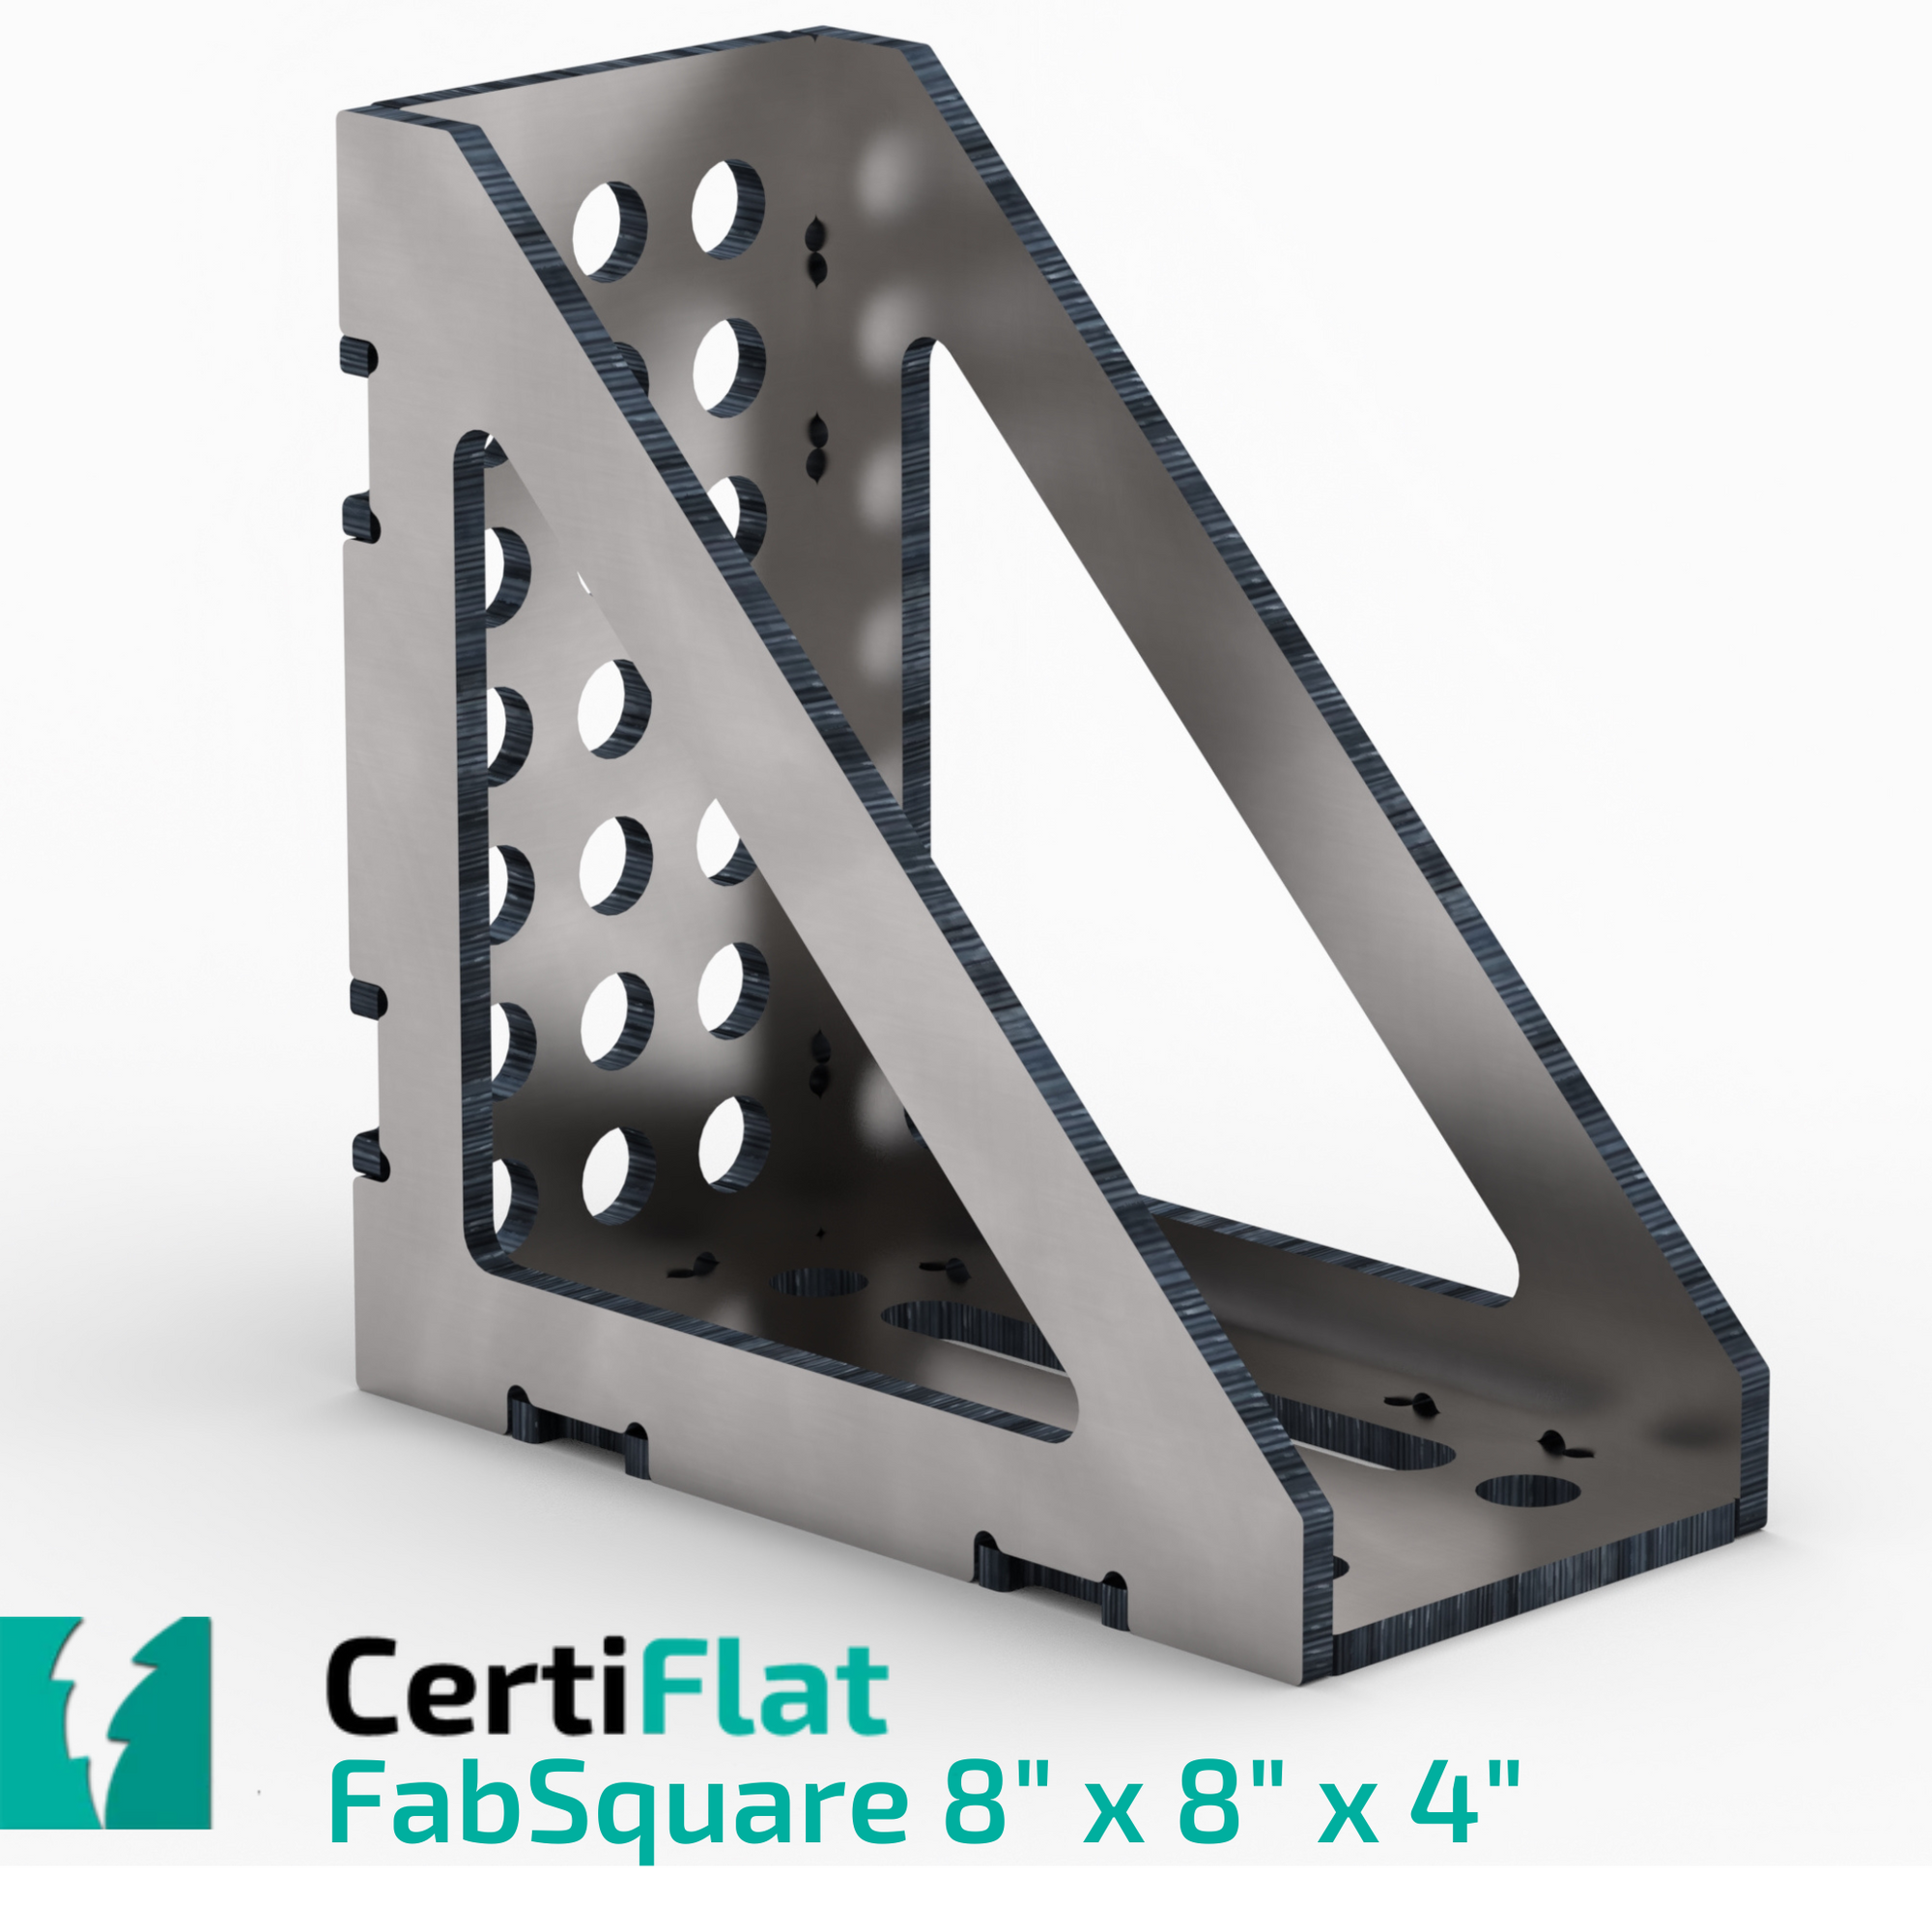 CERTIFLAT 8"X8"X4" WIDE 90 DEGREE FABSQUARE